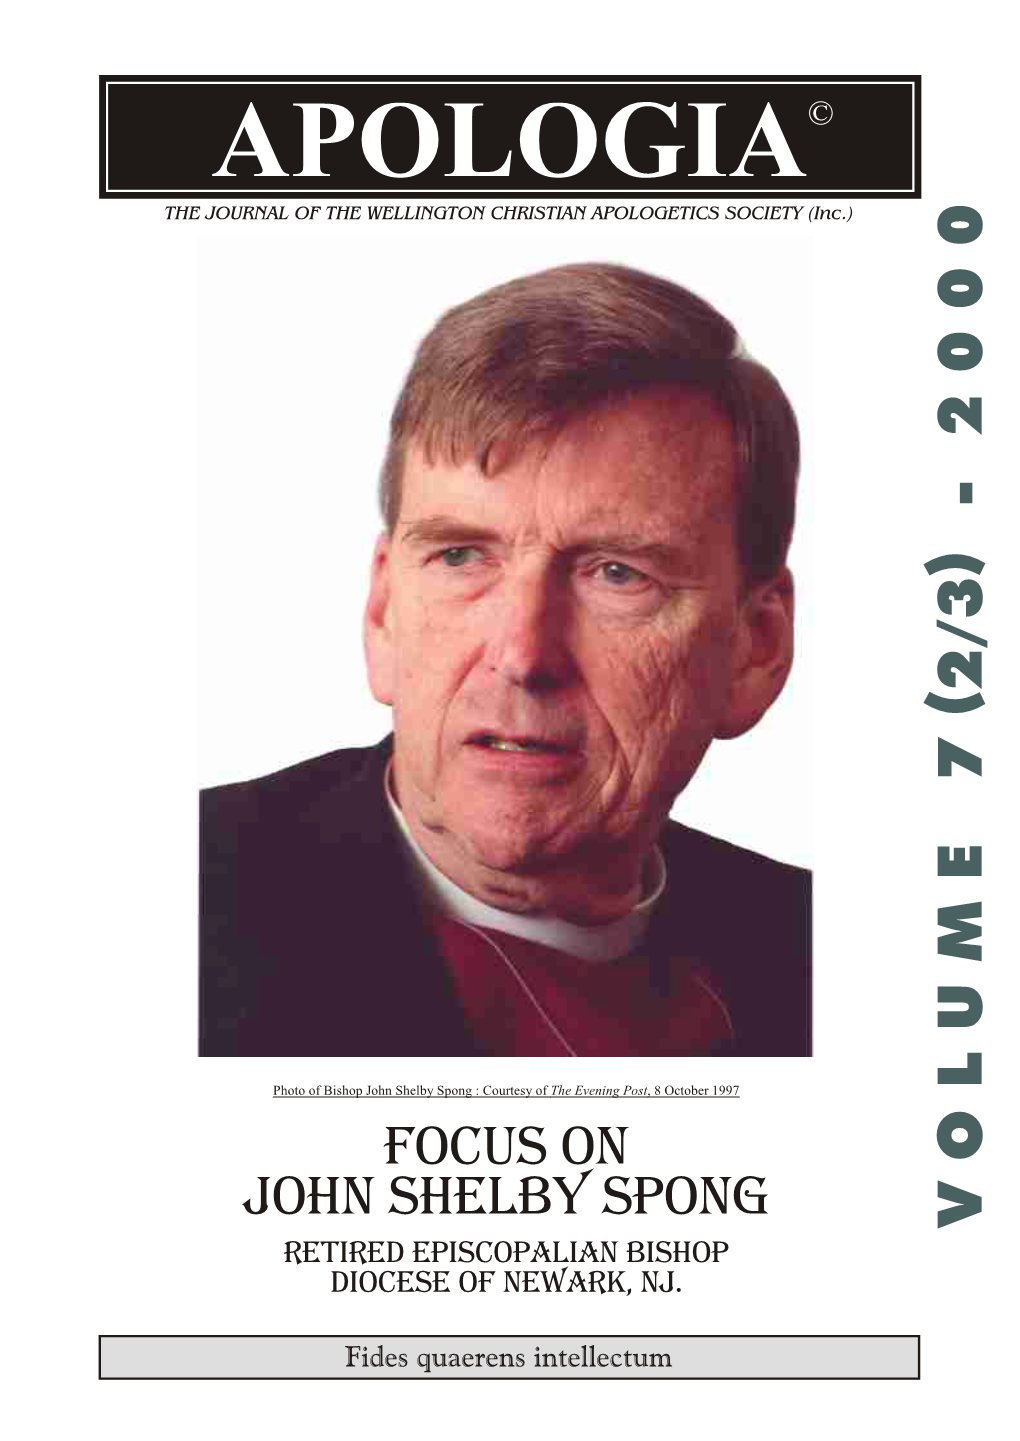 John Shelby Spong : Courtesy of the Evening Post, 8 October 1997 L